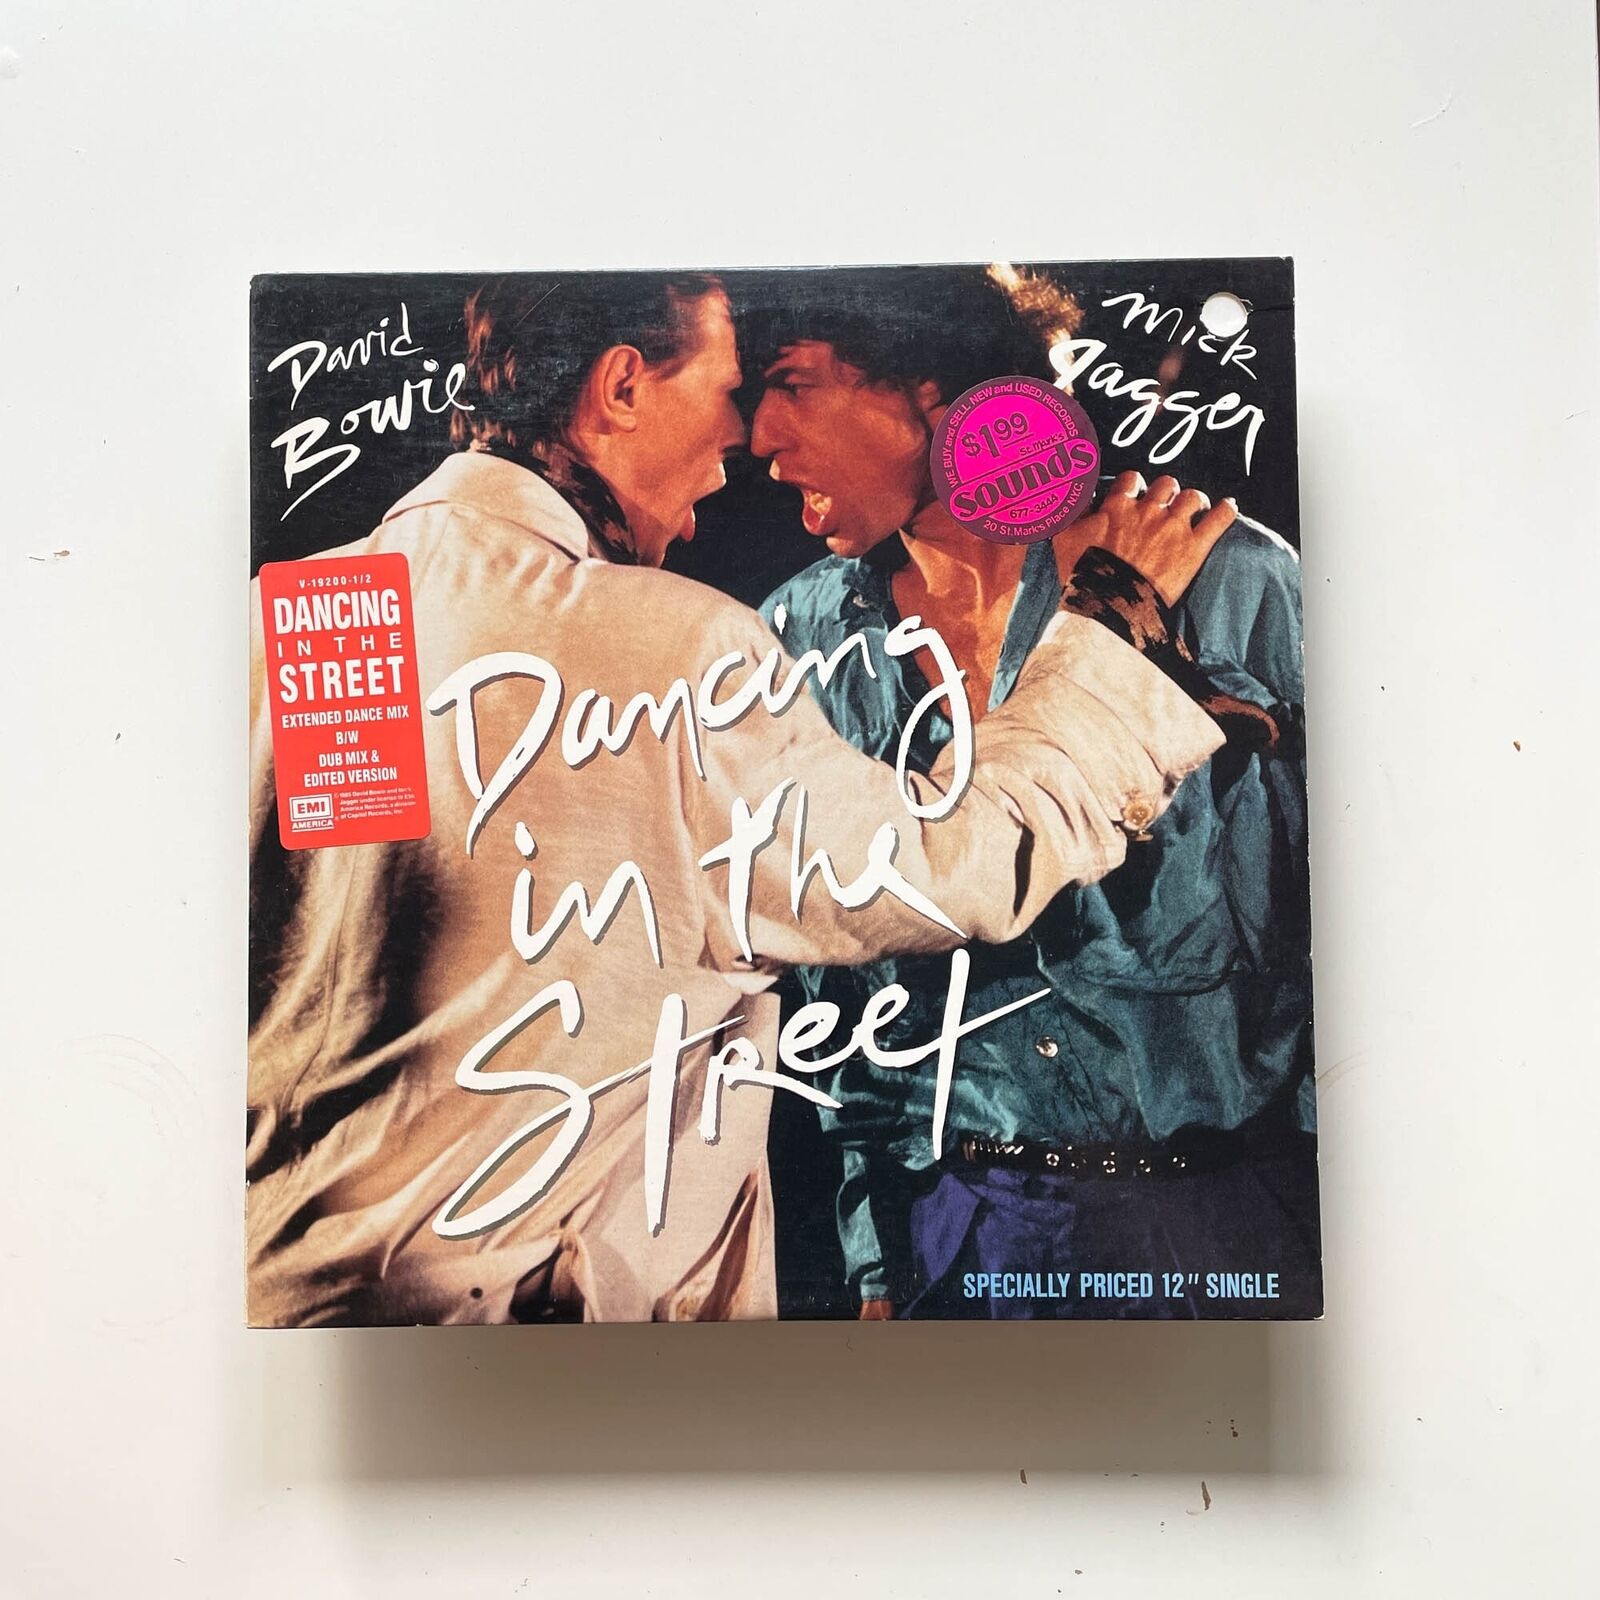 David Bowie and Mick Jagger - Dancing In The Street - Vinyl LP Record - 1985